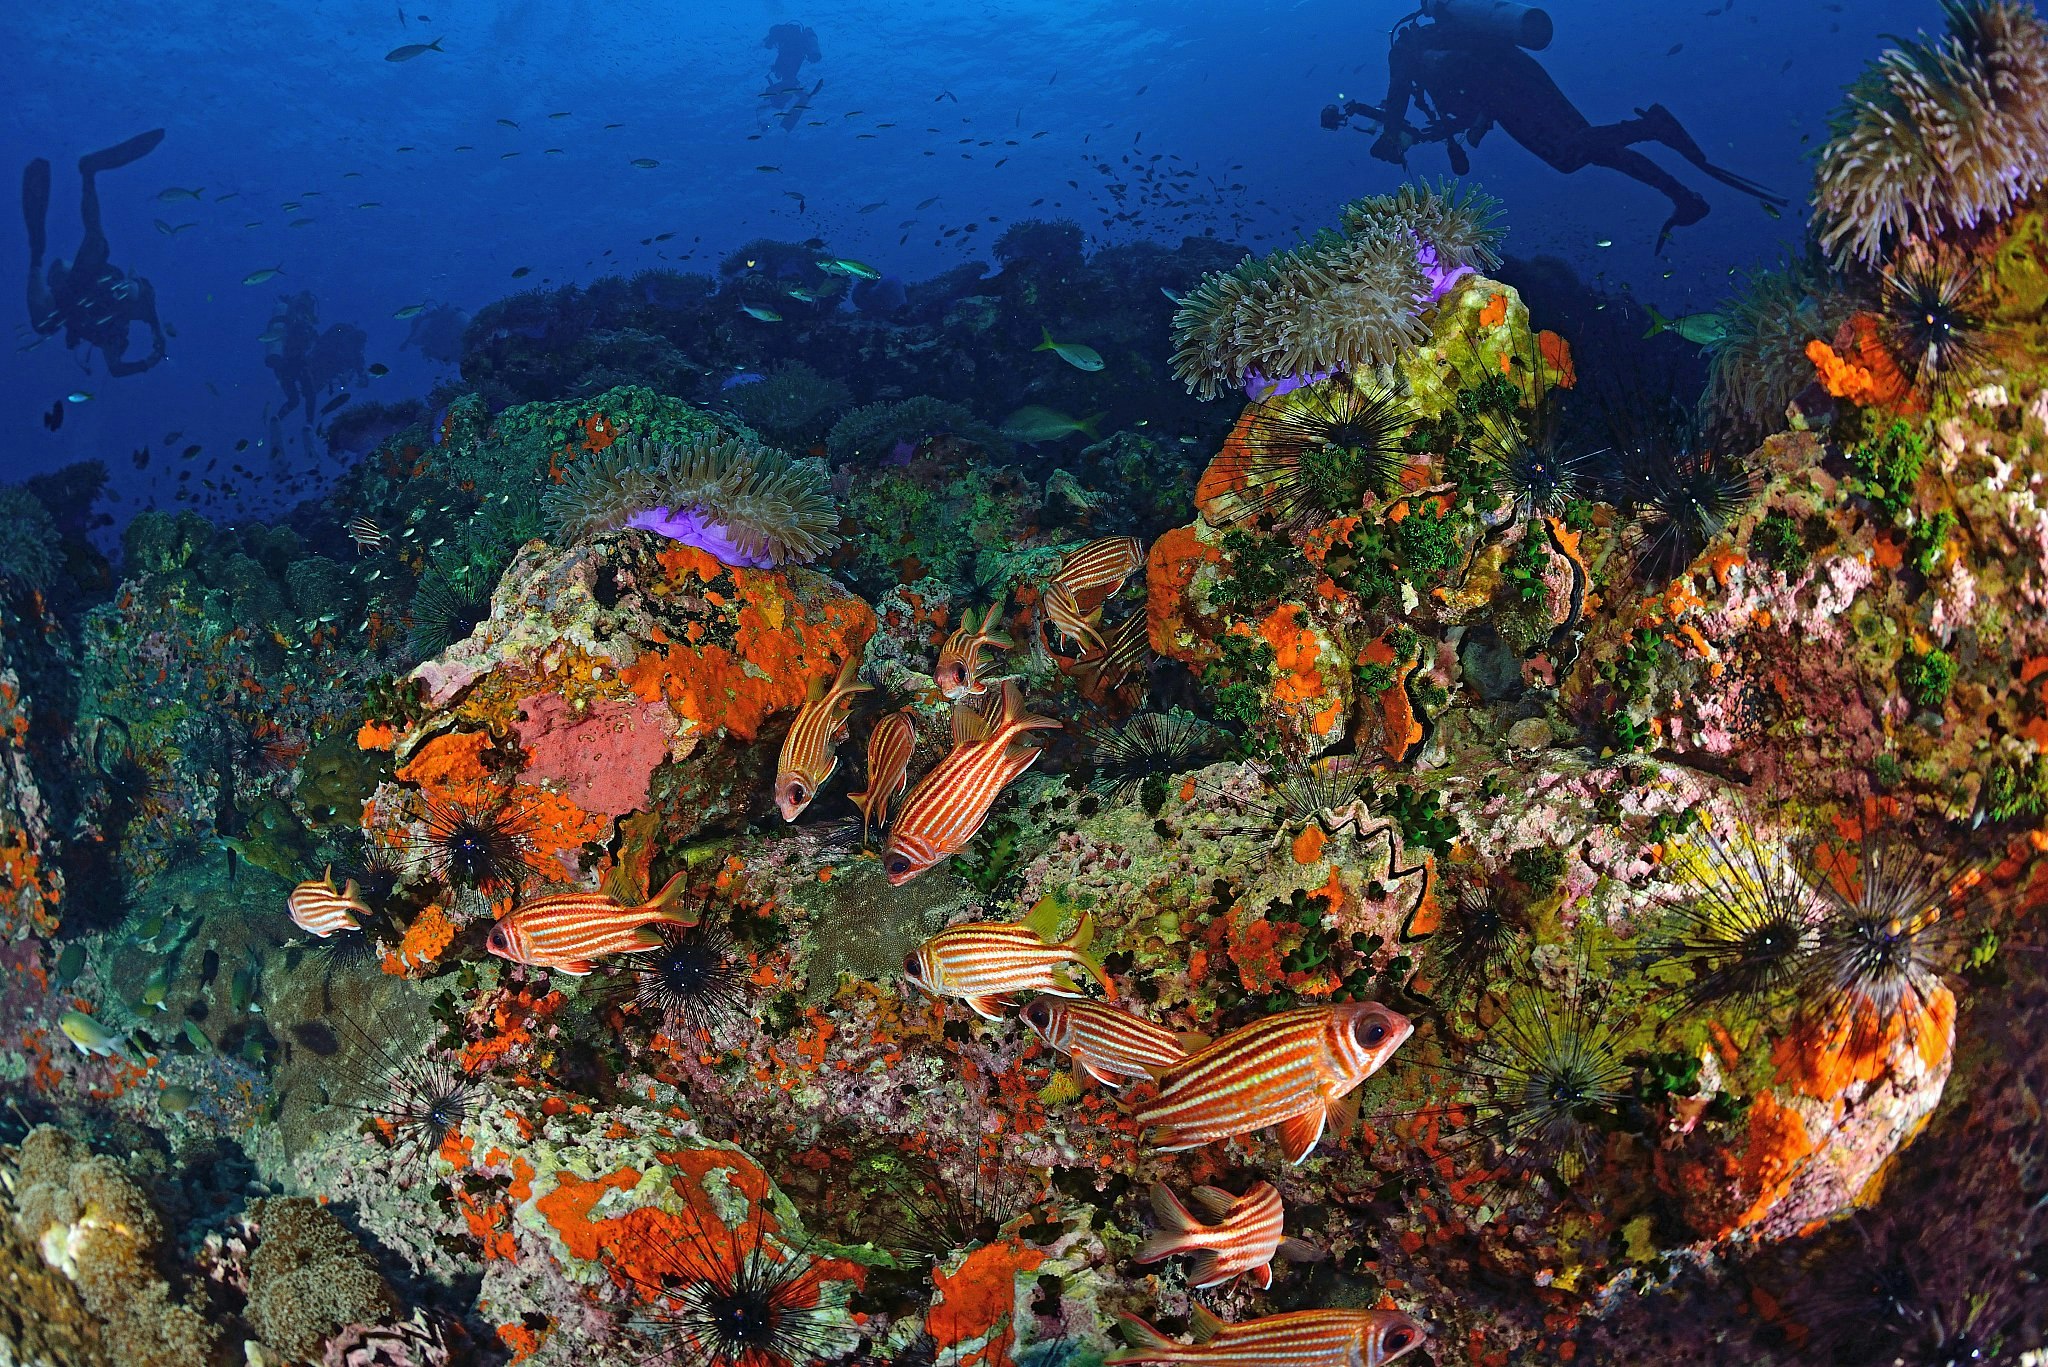 A shoal of orange and white striped tropical fish swimming past coral, with divers in the background.